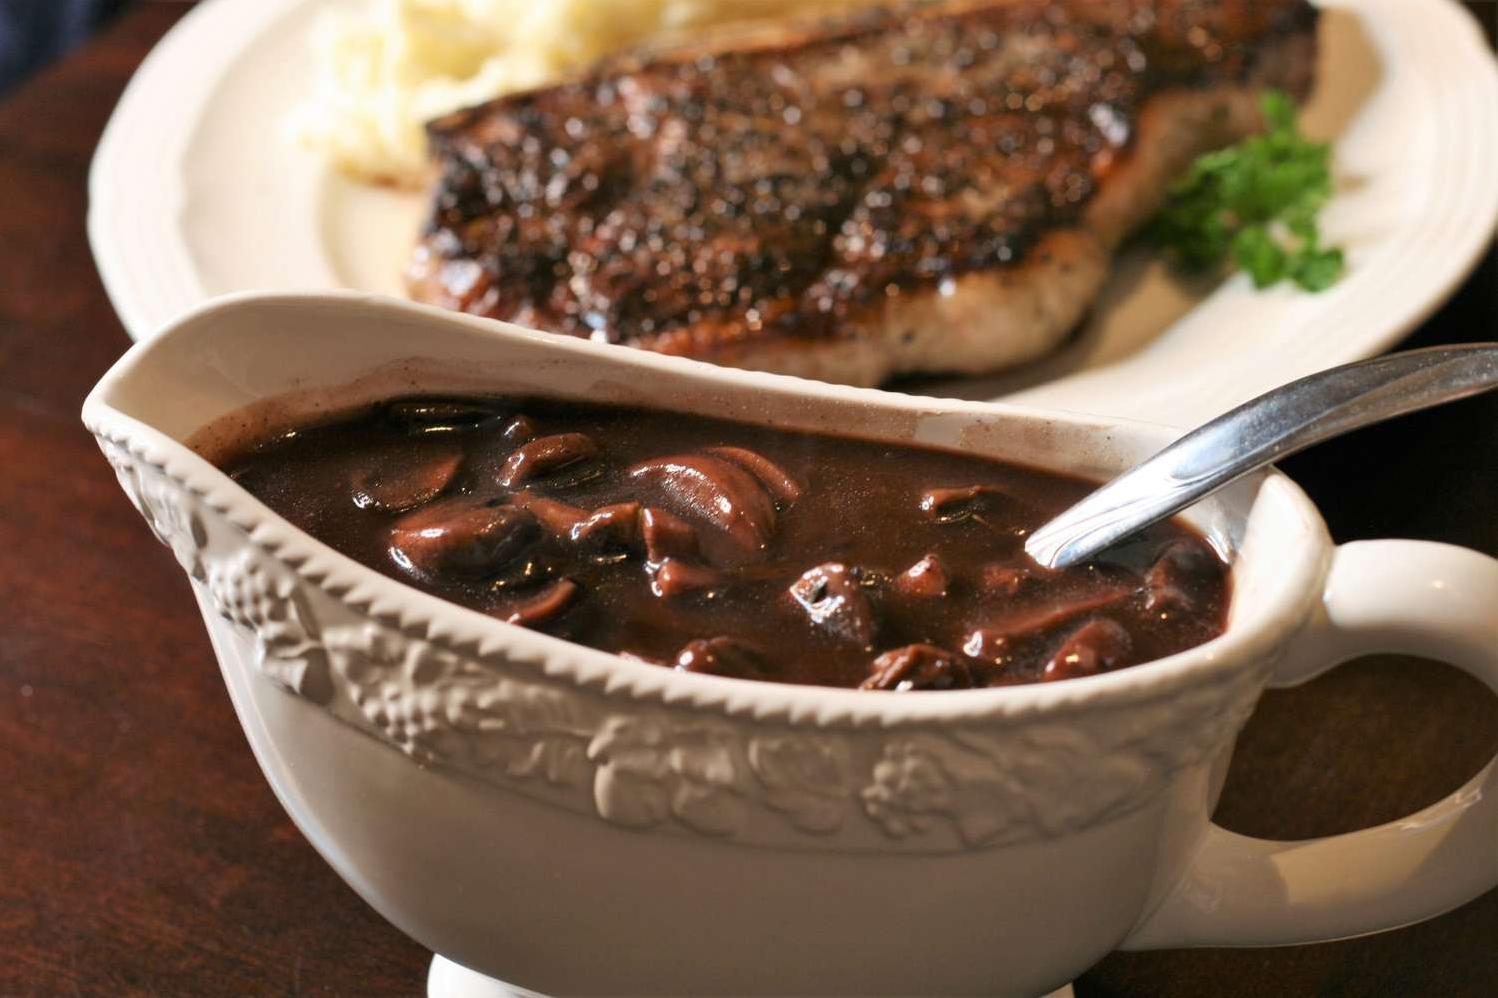  Take your steak to the next level with this perfect pairing of mushroom and wine sauce.